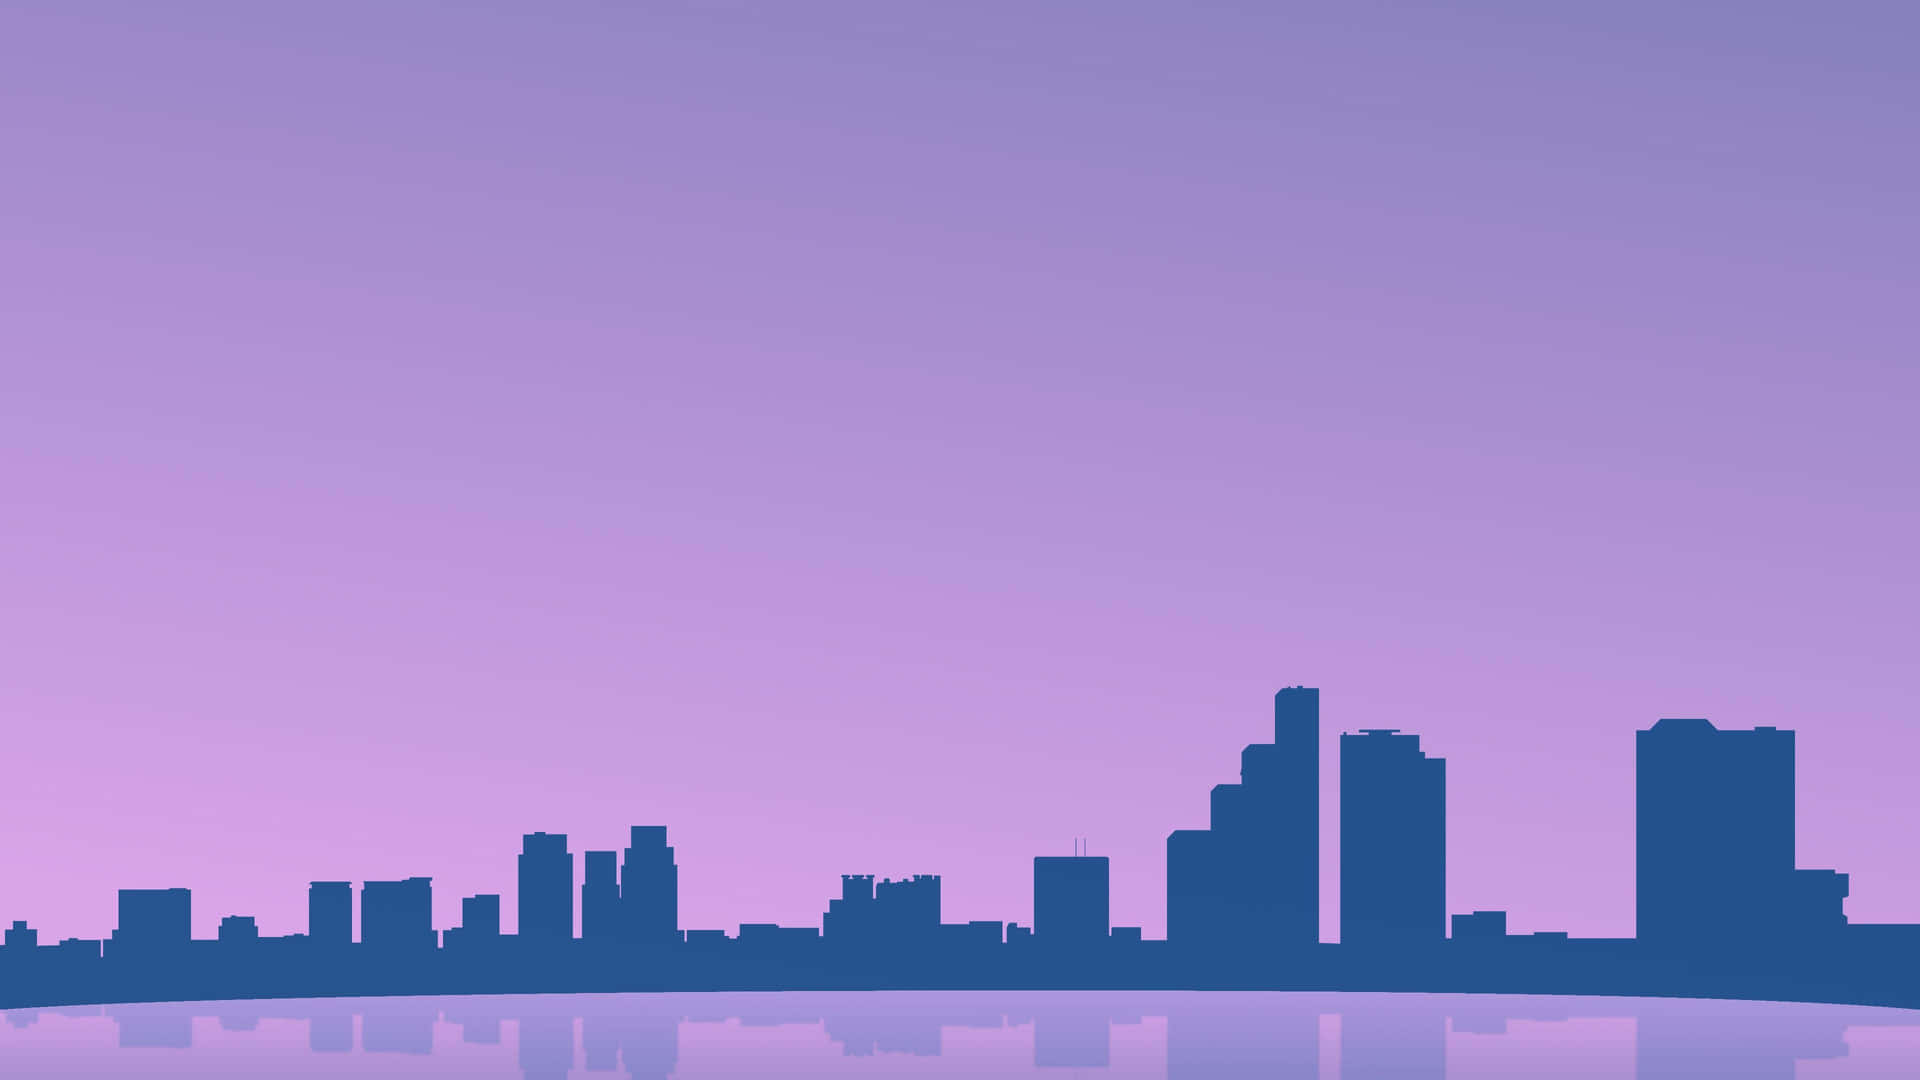 Explore the Vice City streets in this classic GTA game Wallpaper